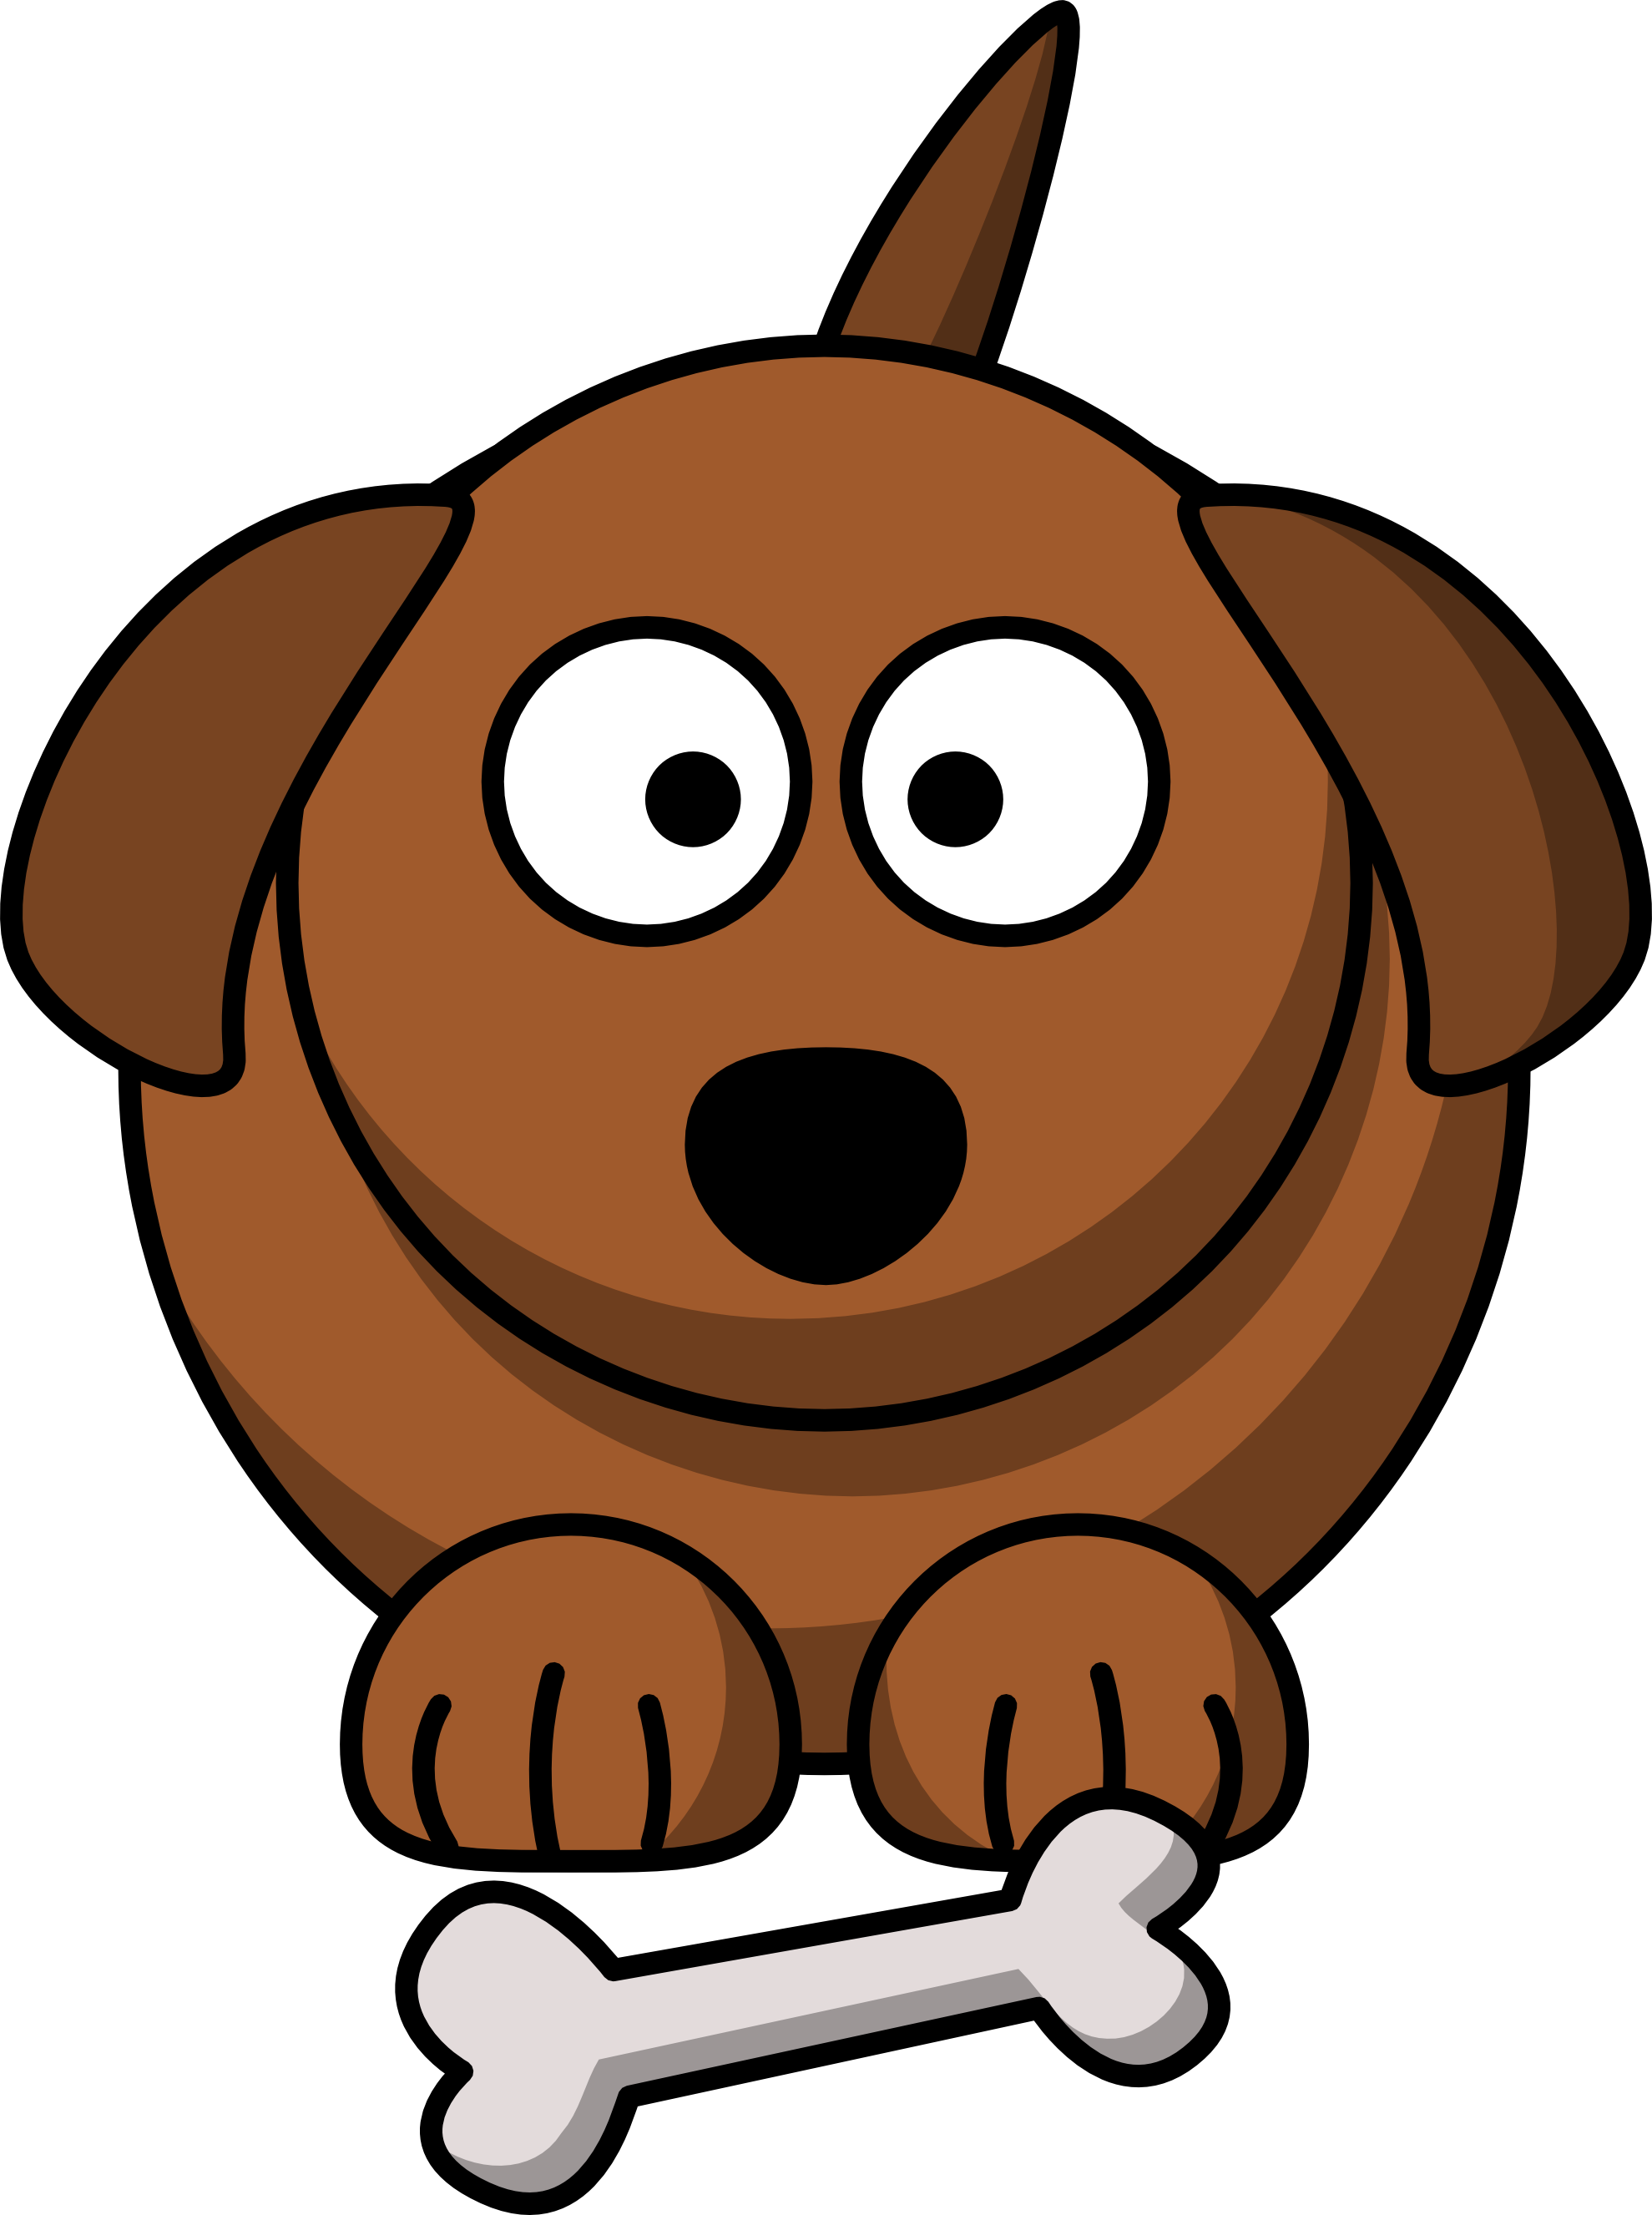 Dog toy clip art free clipart images